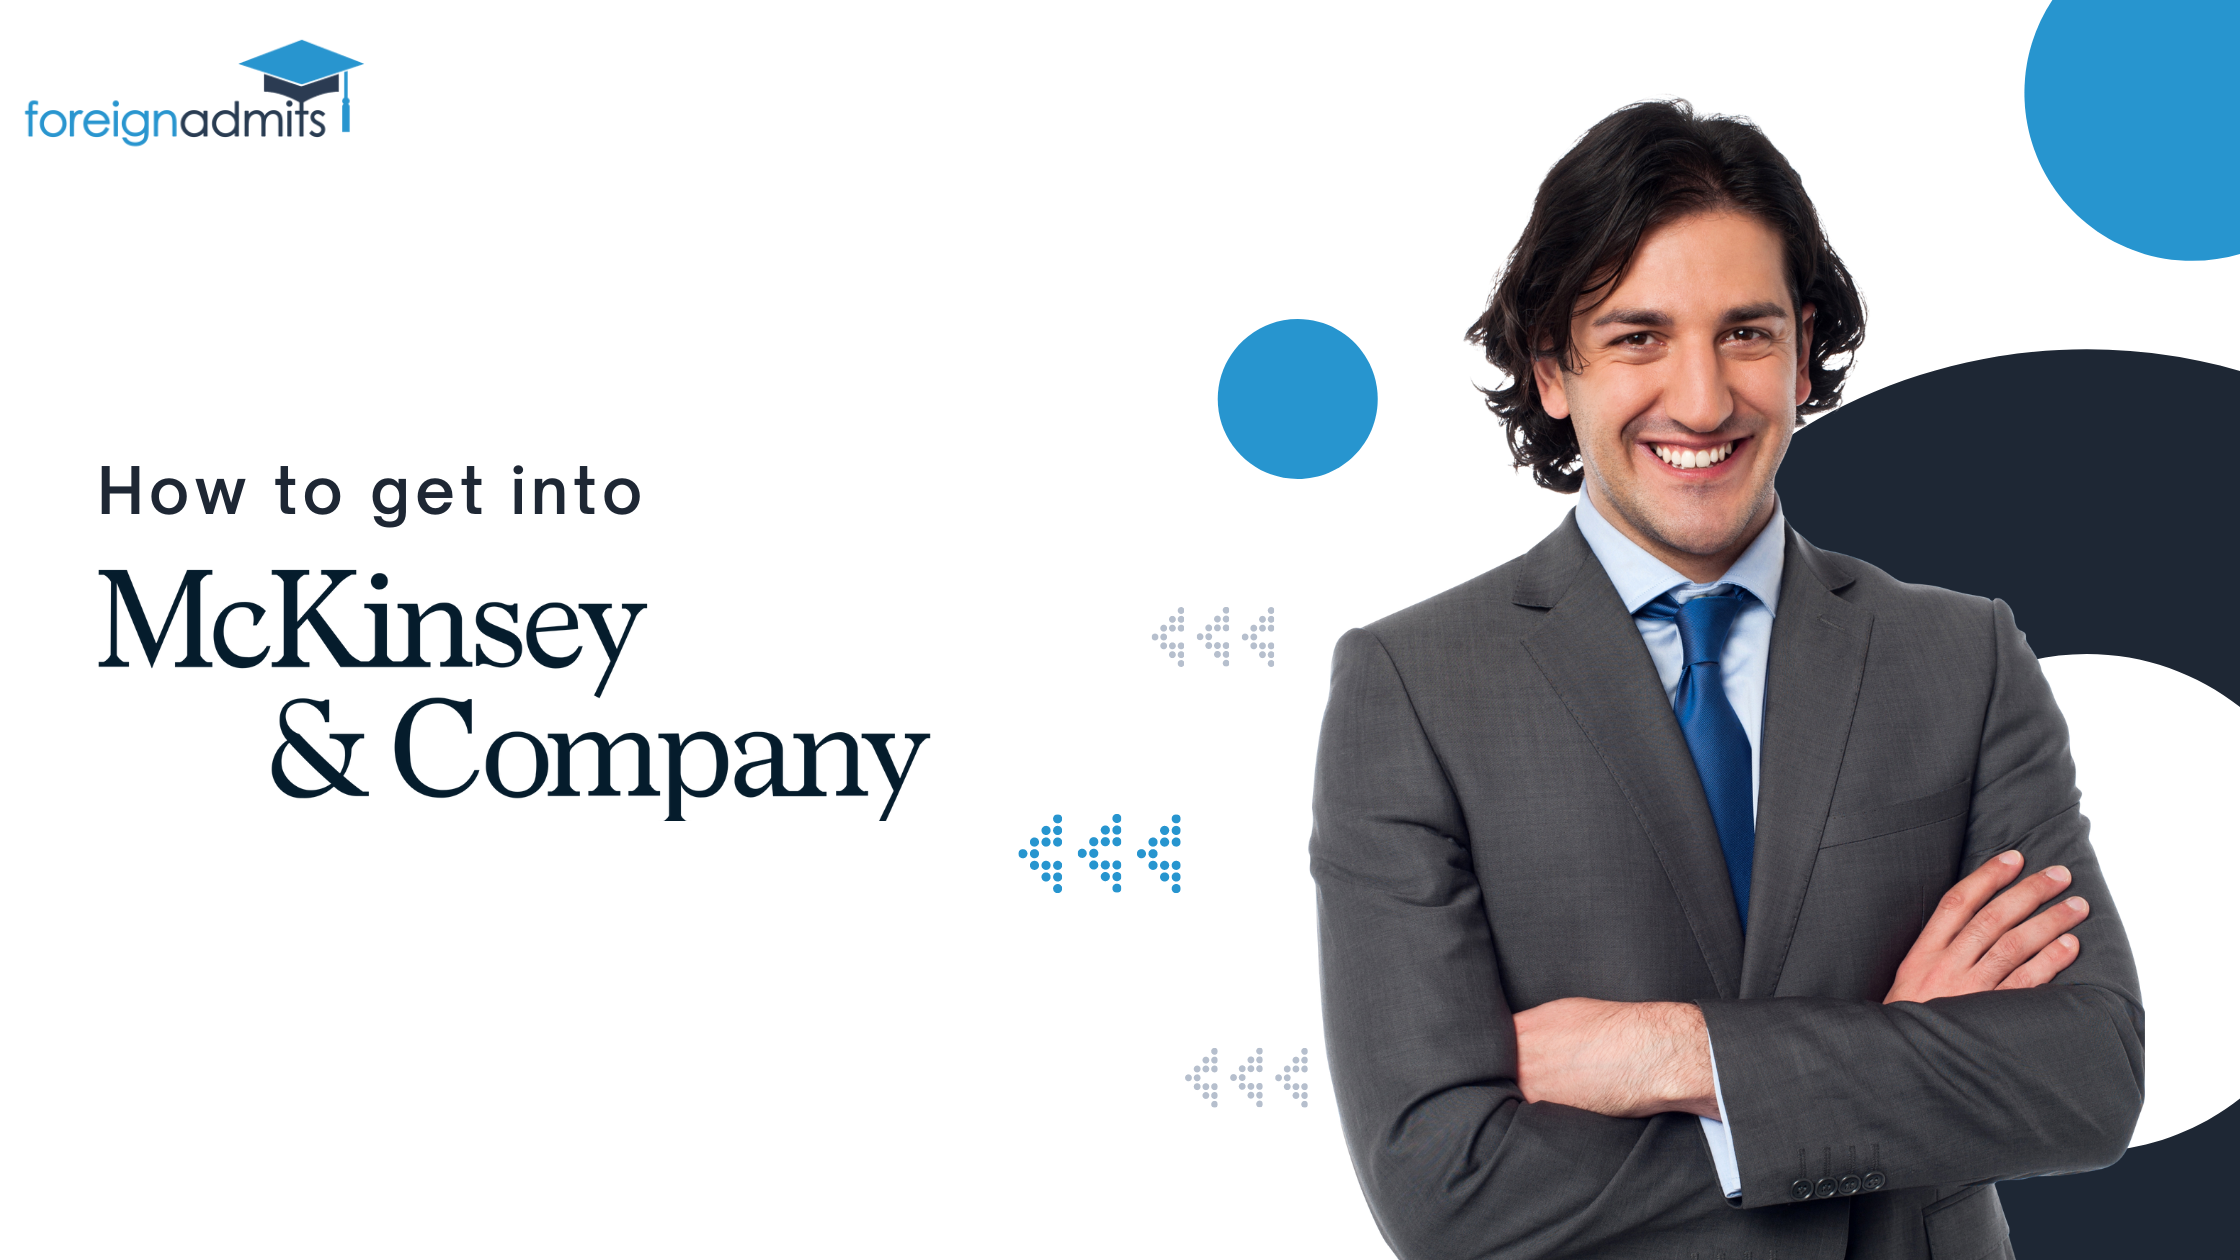 How to get a job at McKinsey & Co?